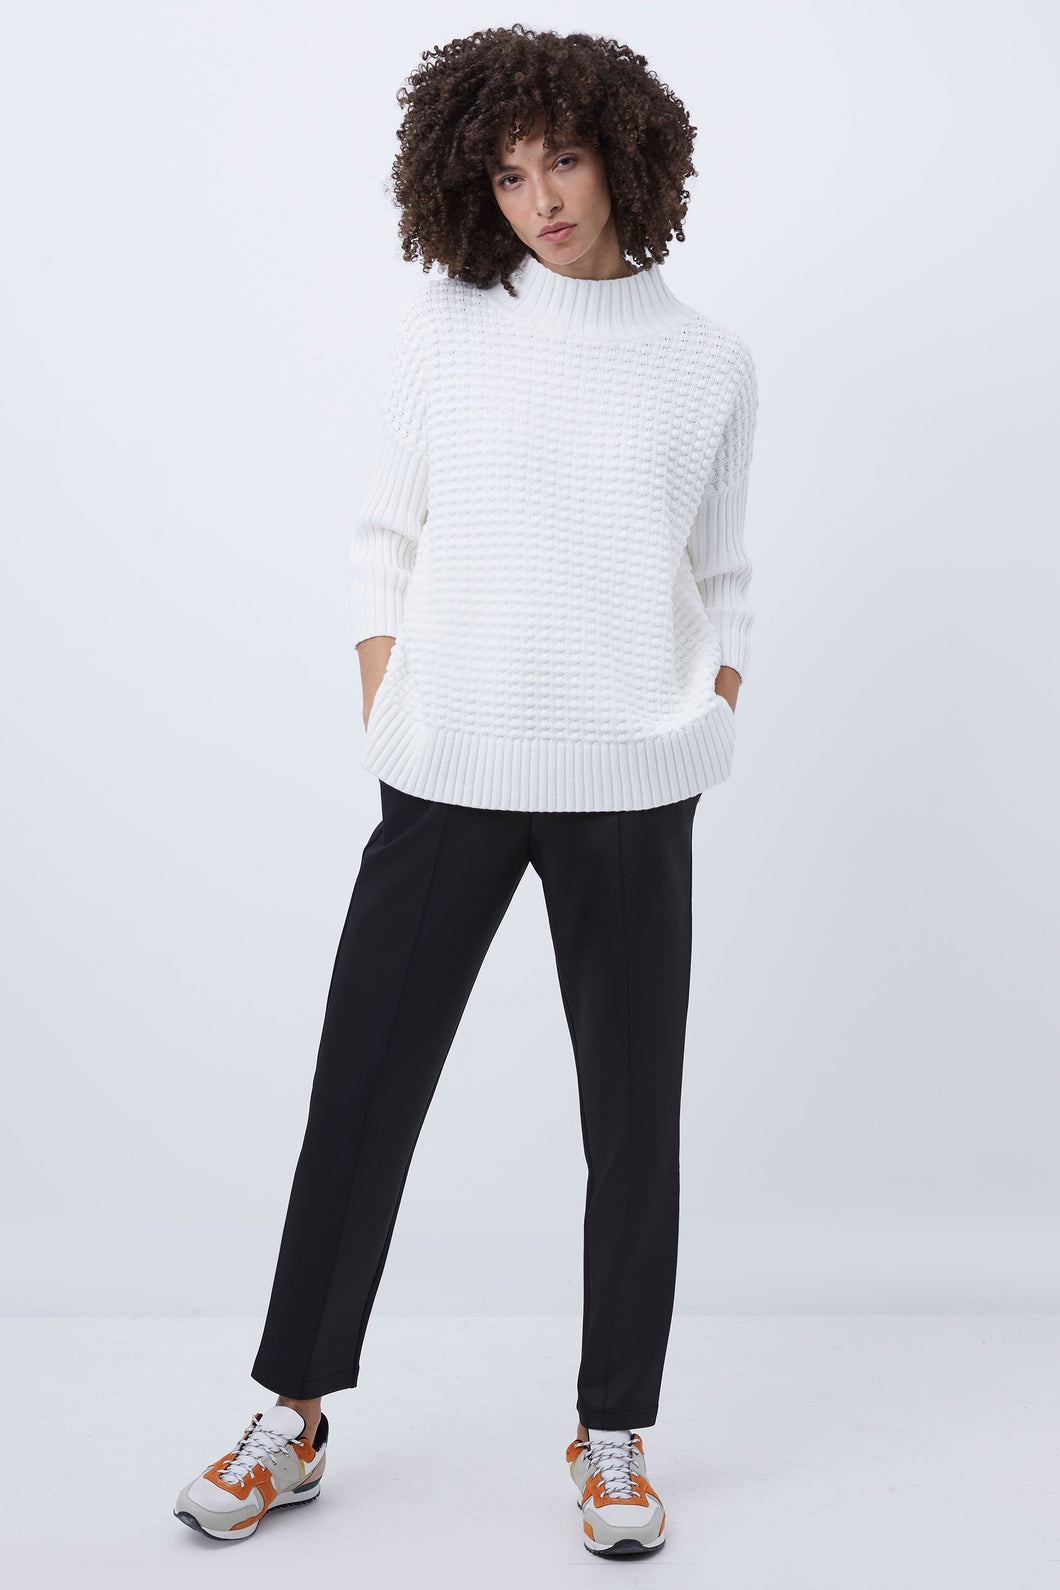 French Connection - Mozart Popcorn High Neck Jumper